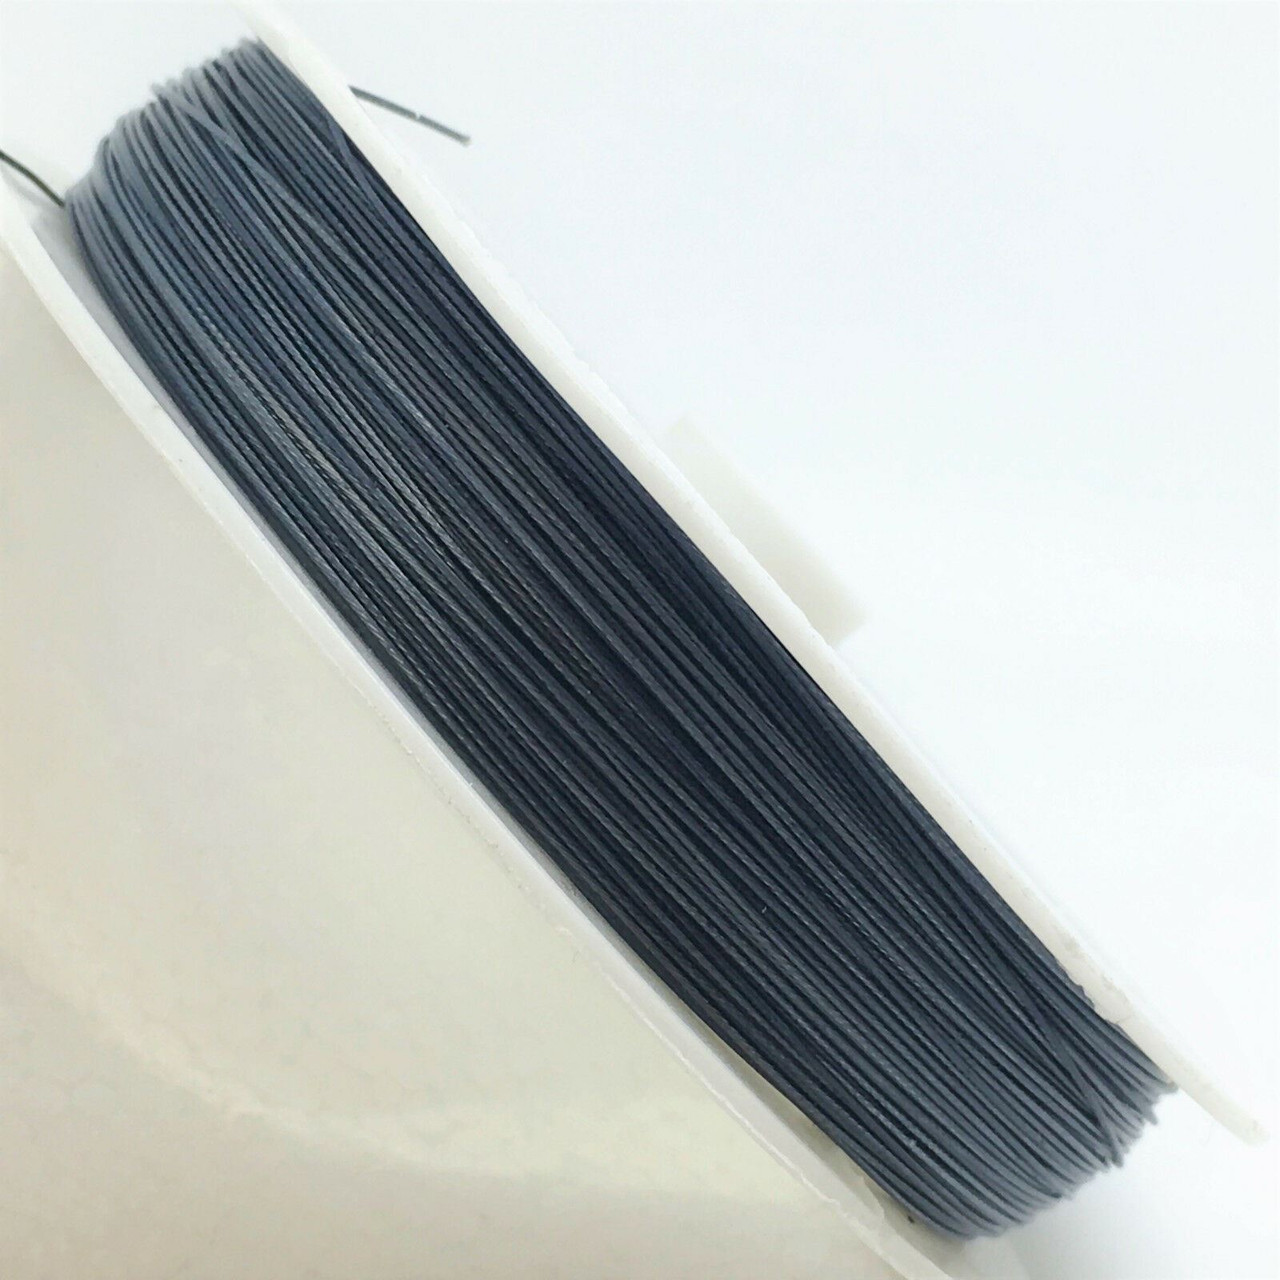 50m roll Tiger Tail - Charcoal Grey - 0.38mm